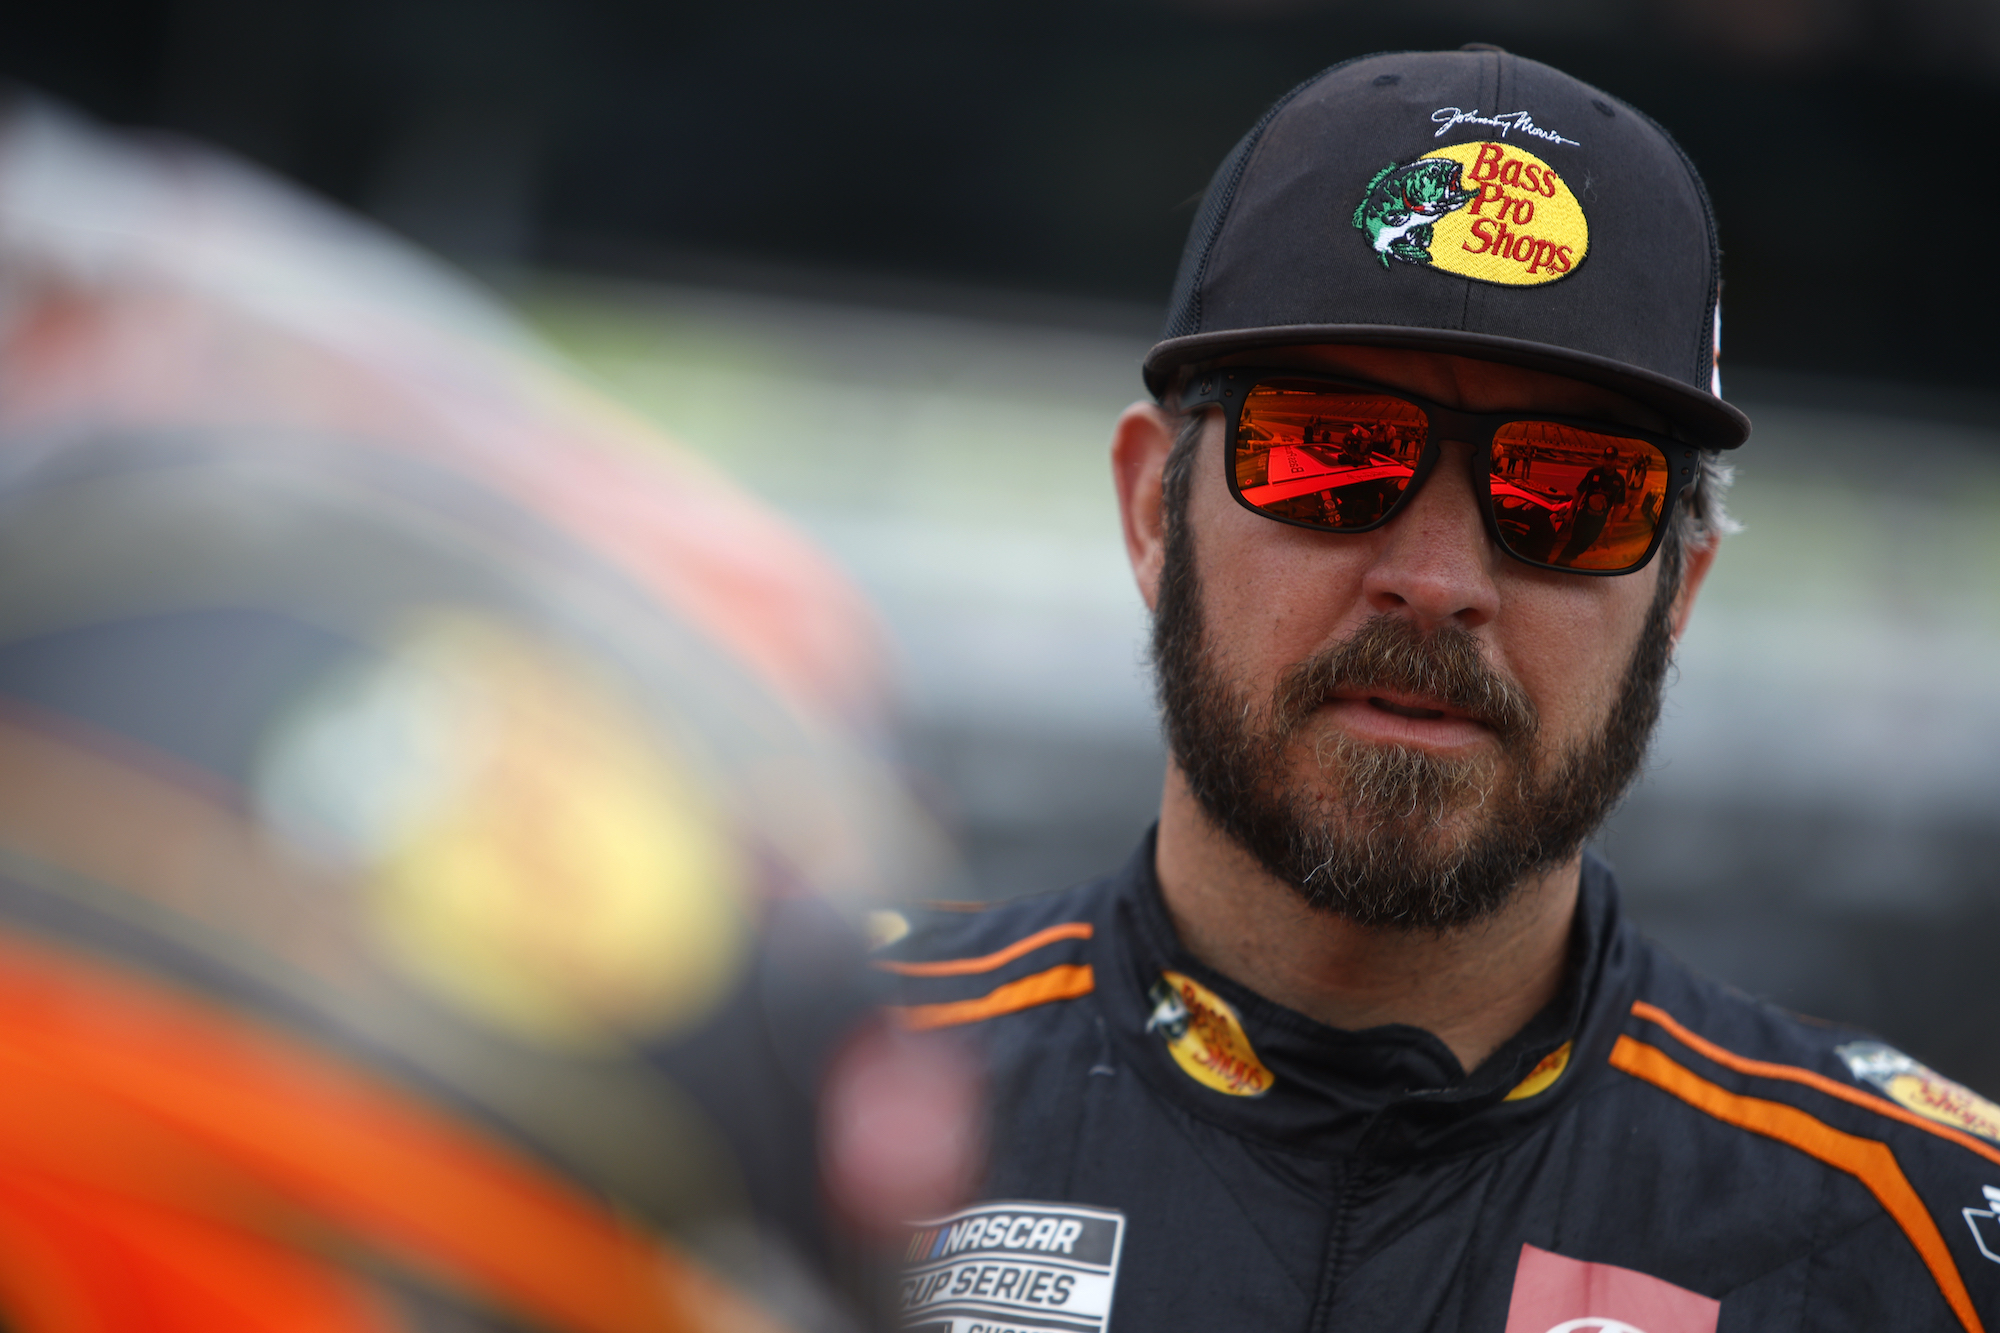 Martin Truex Jr. Sends Warning to Ross Chastain About ‘Making a Bunch of Enemies’ and How He Should Expect Retaliation